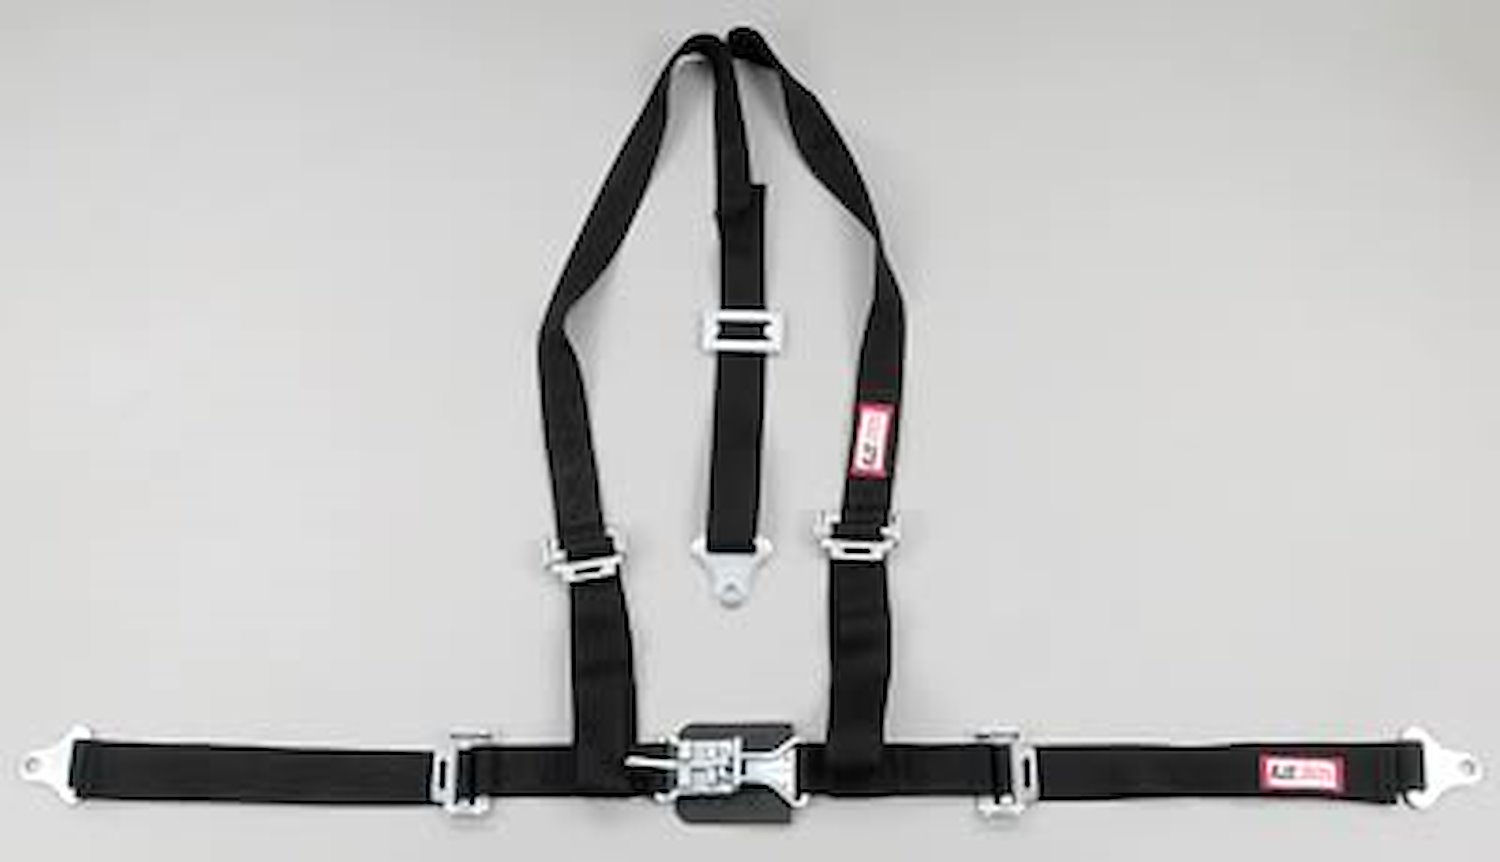 NON-SFI L&L HARNESS 3 PULL UP Lap BELT SEWN IN 2 S.H. Y FLOOR Mount ALL WRAP ENDS RED